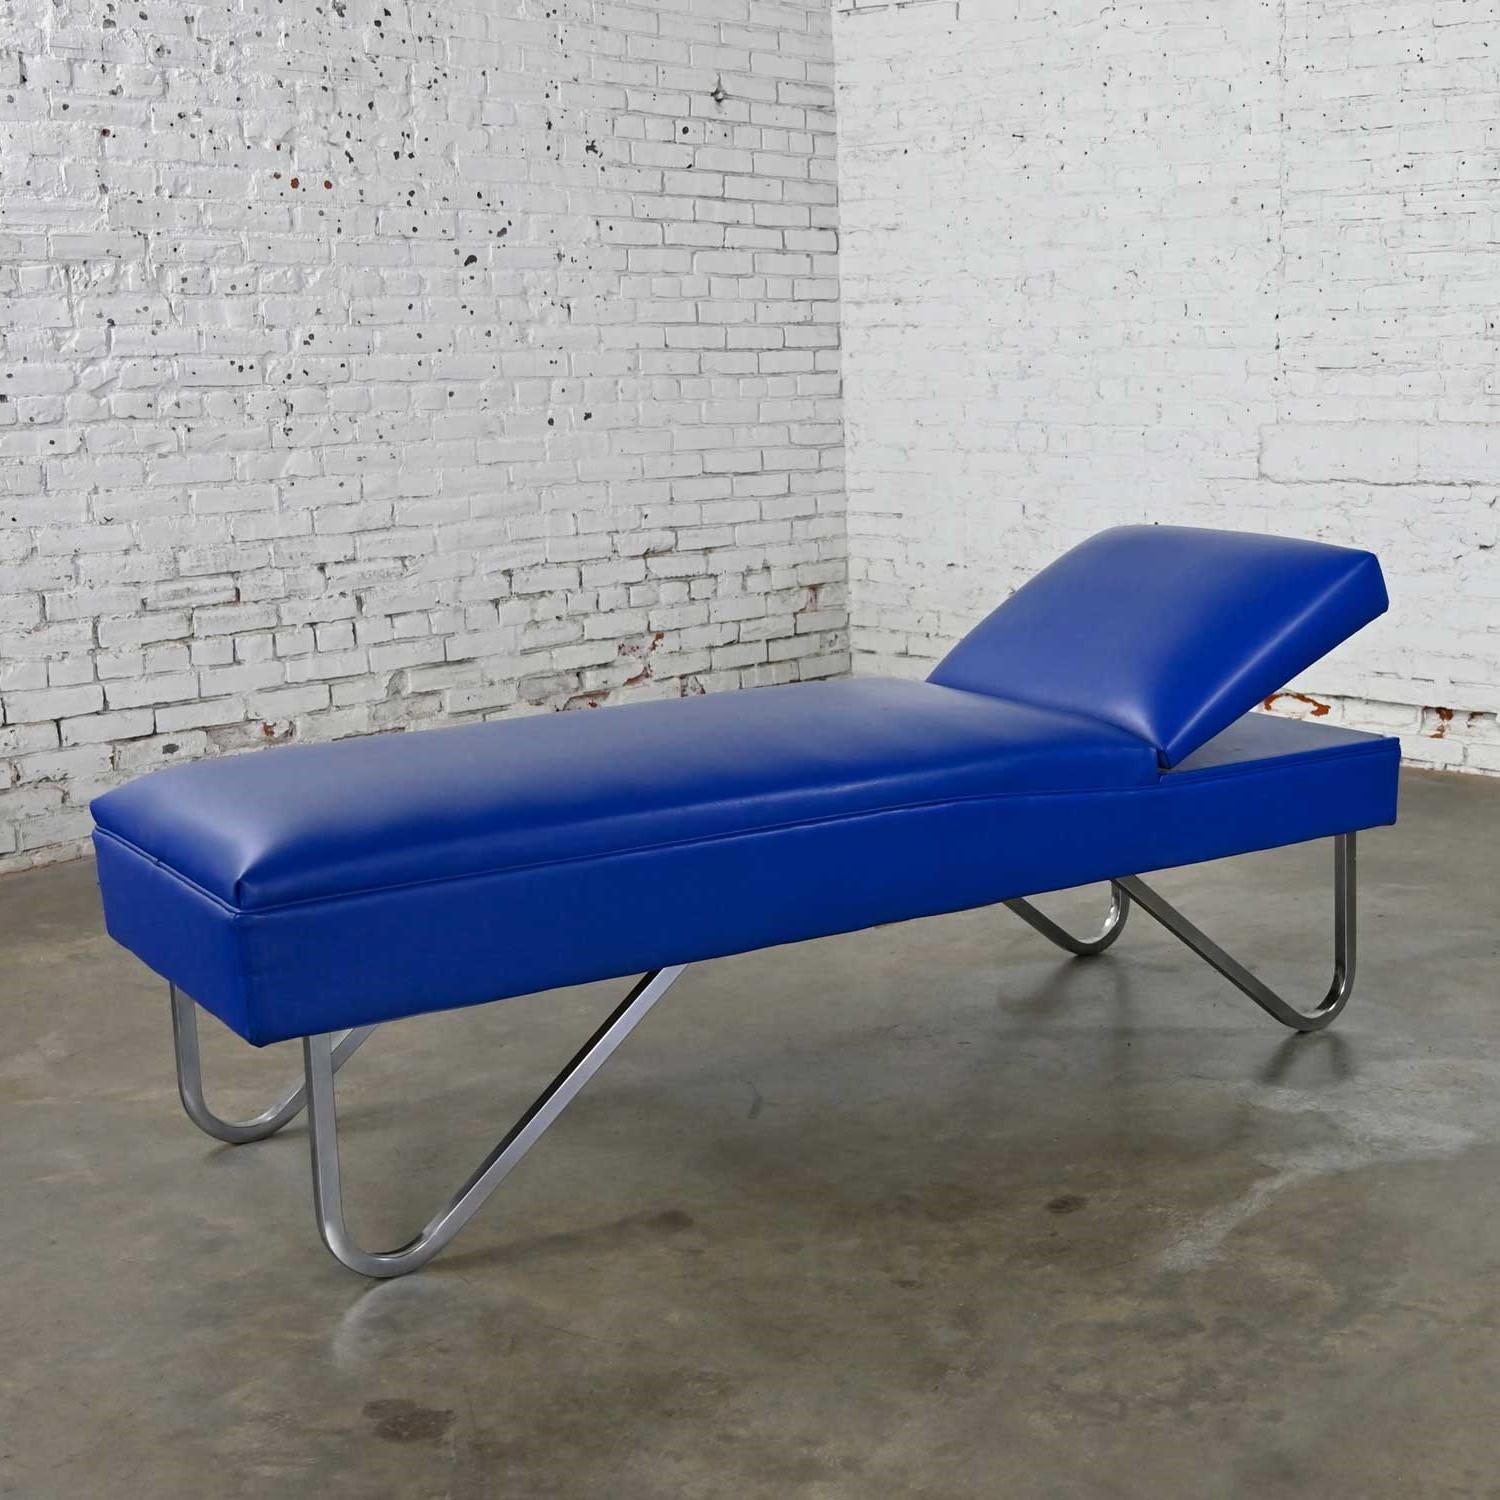 MCM Streamline Modern Industrial Royal Blue Vinyl & Chrome Adjustable Chaise In Good Condition For Sale In Topeka, KS